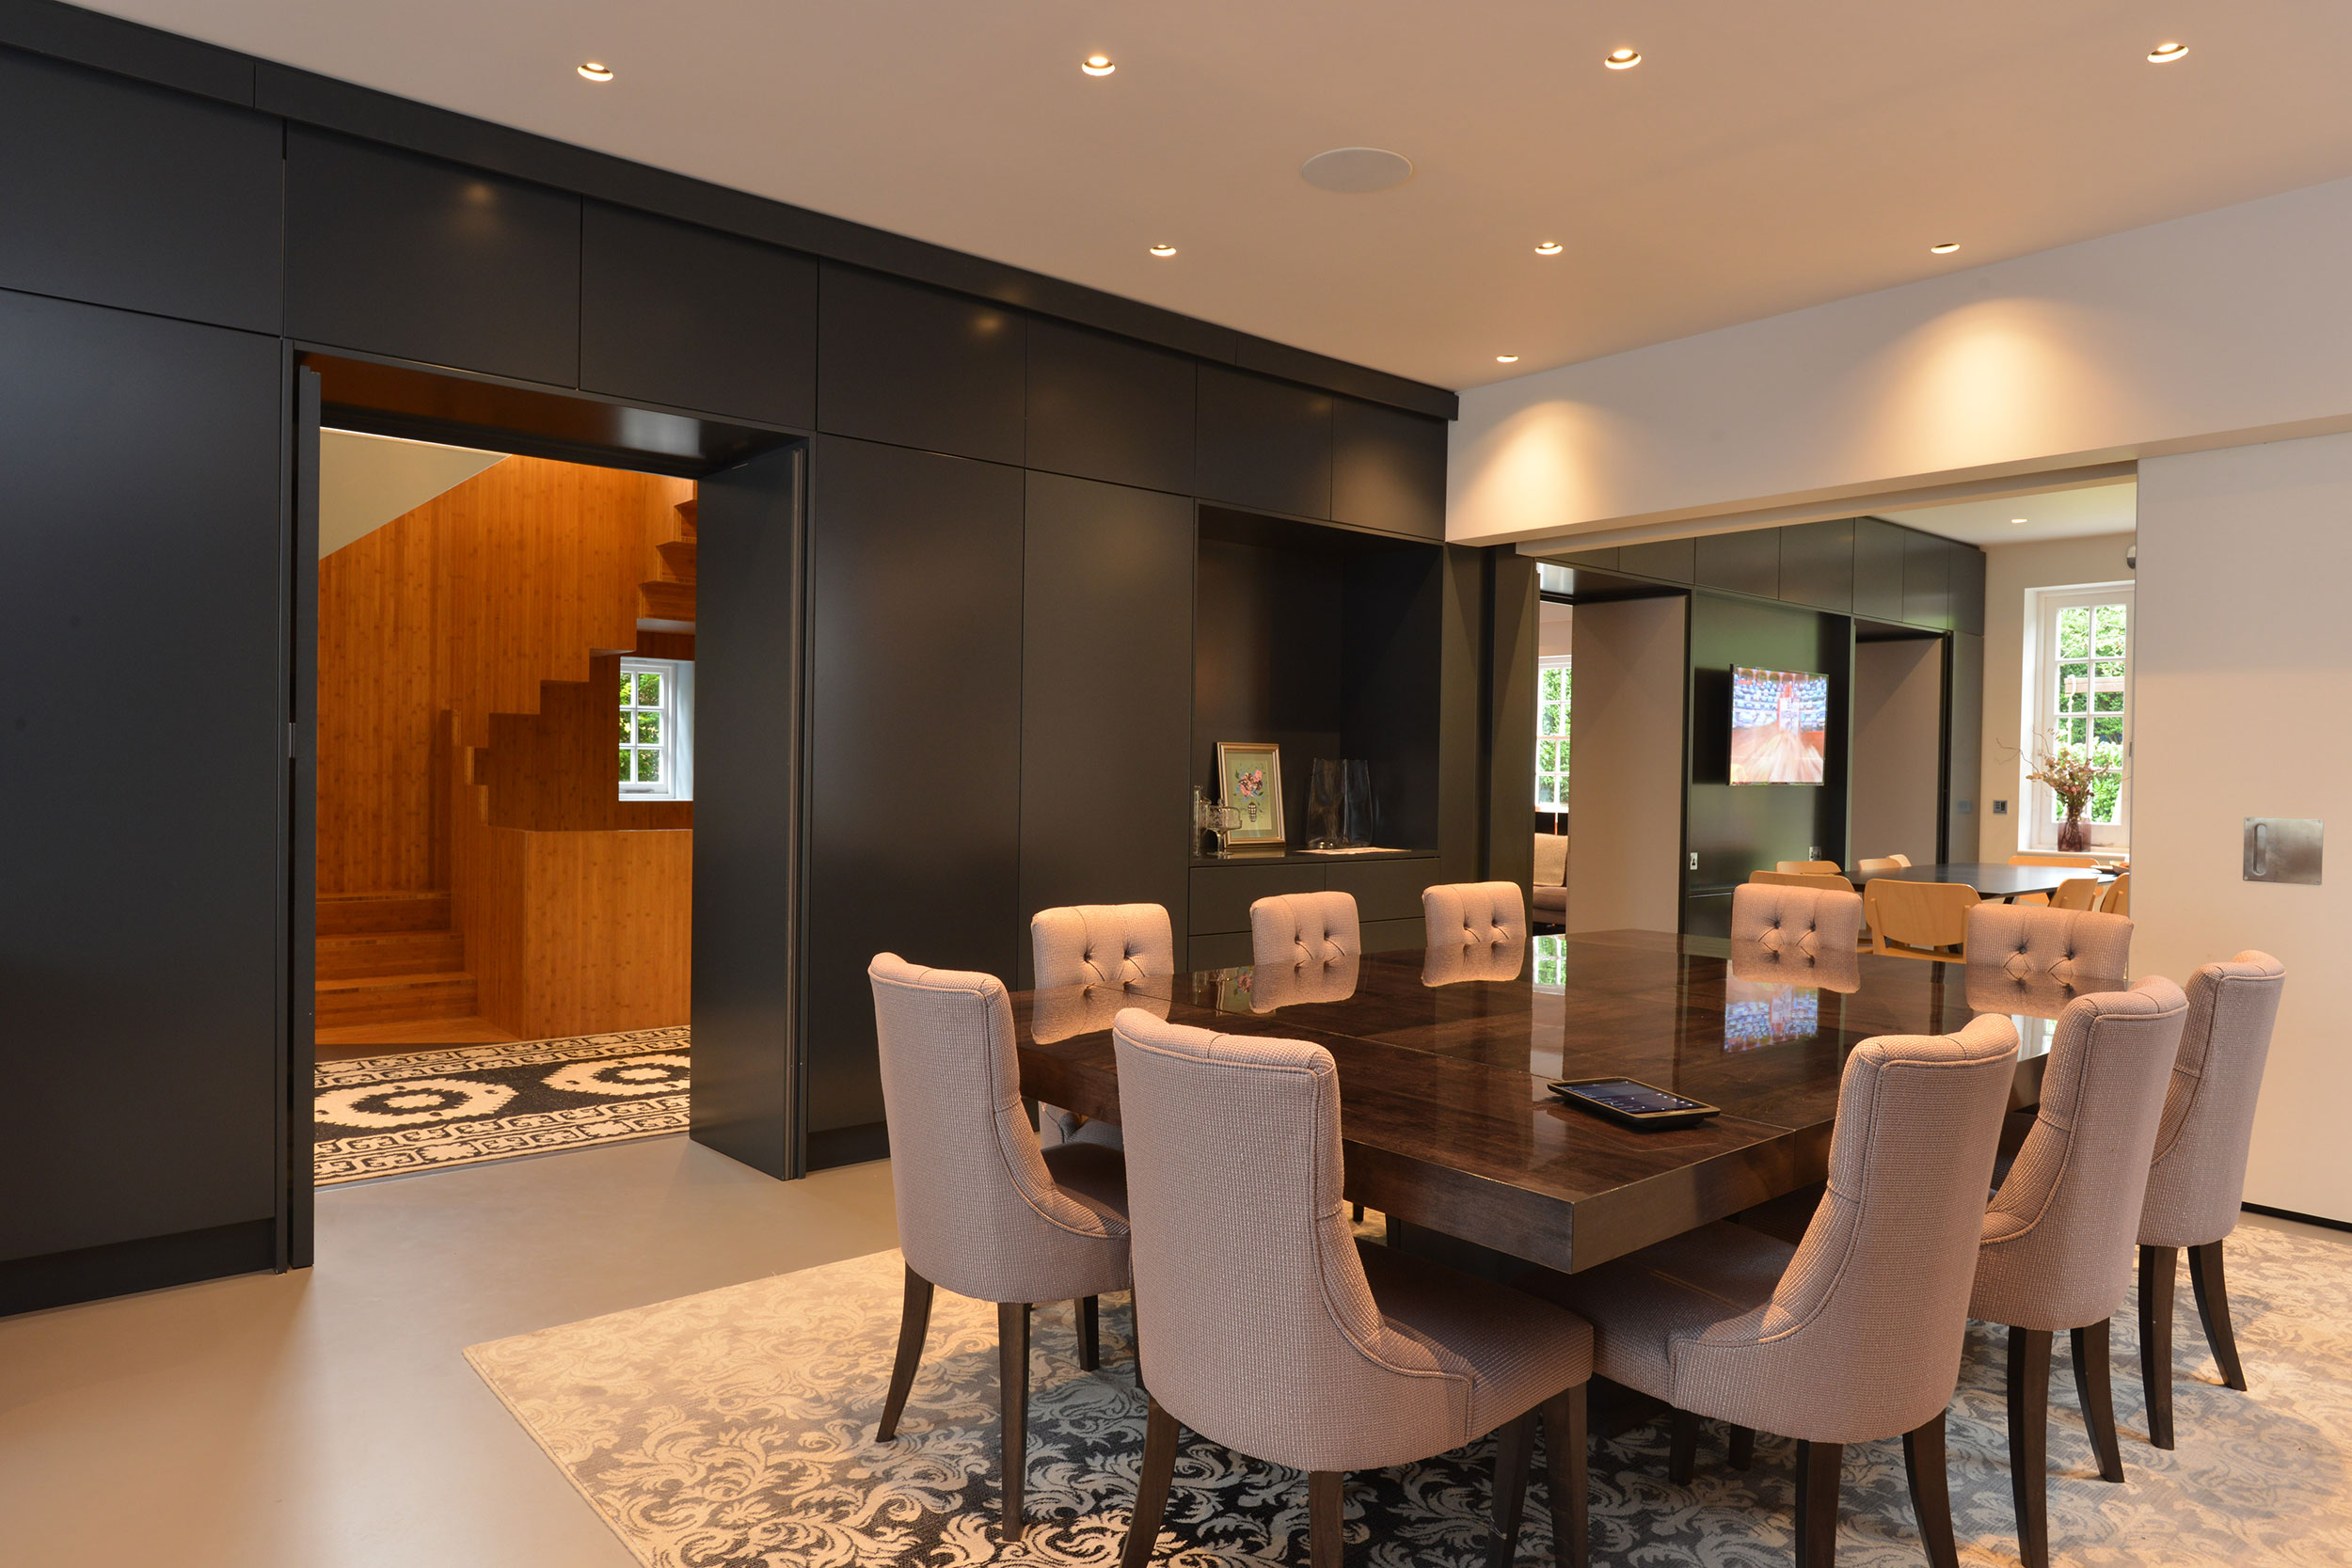  Luxury Family Home - Hampstead gallery image 3